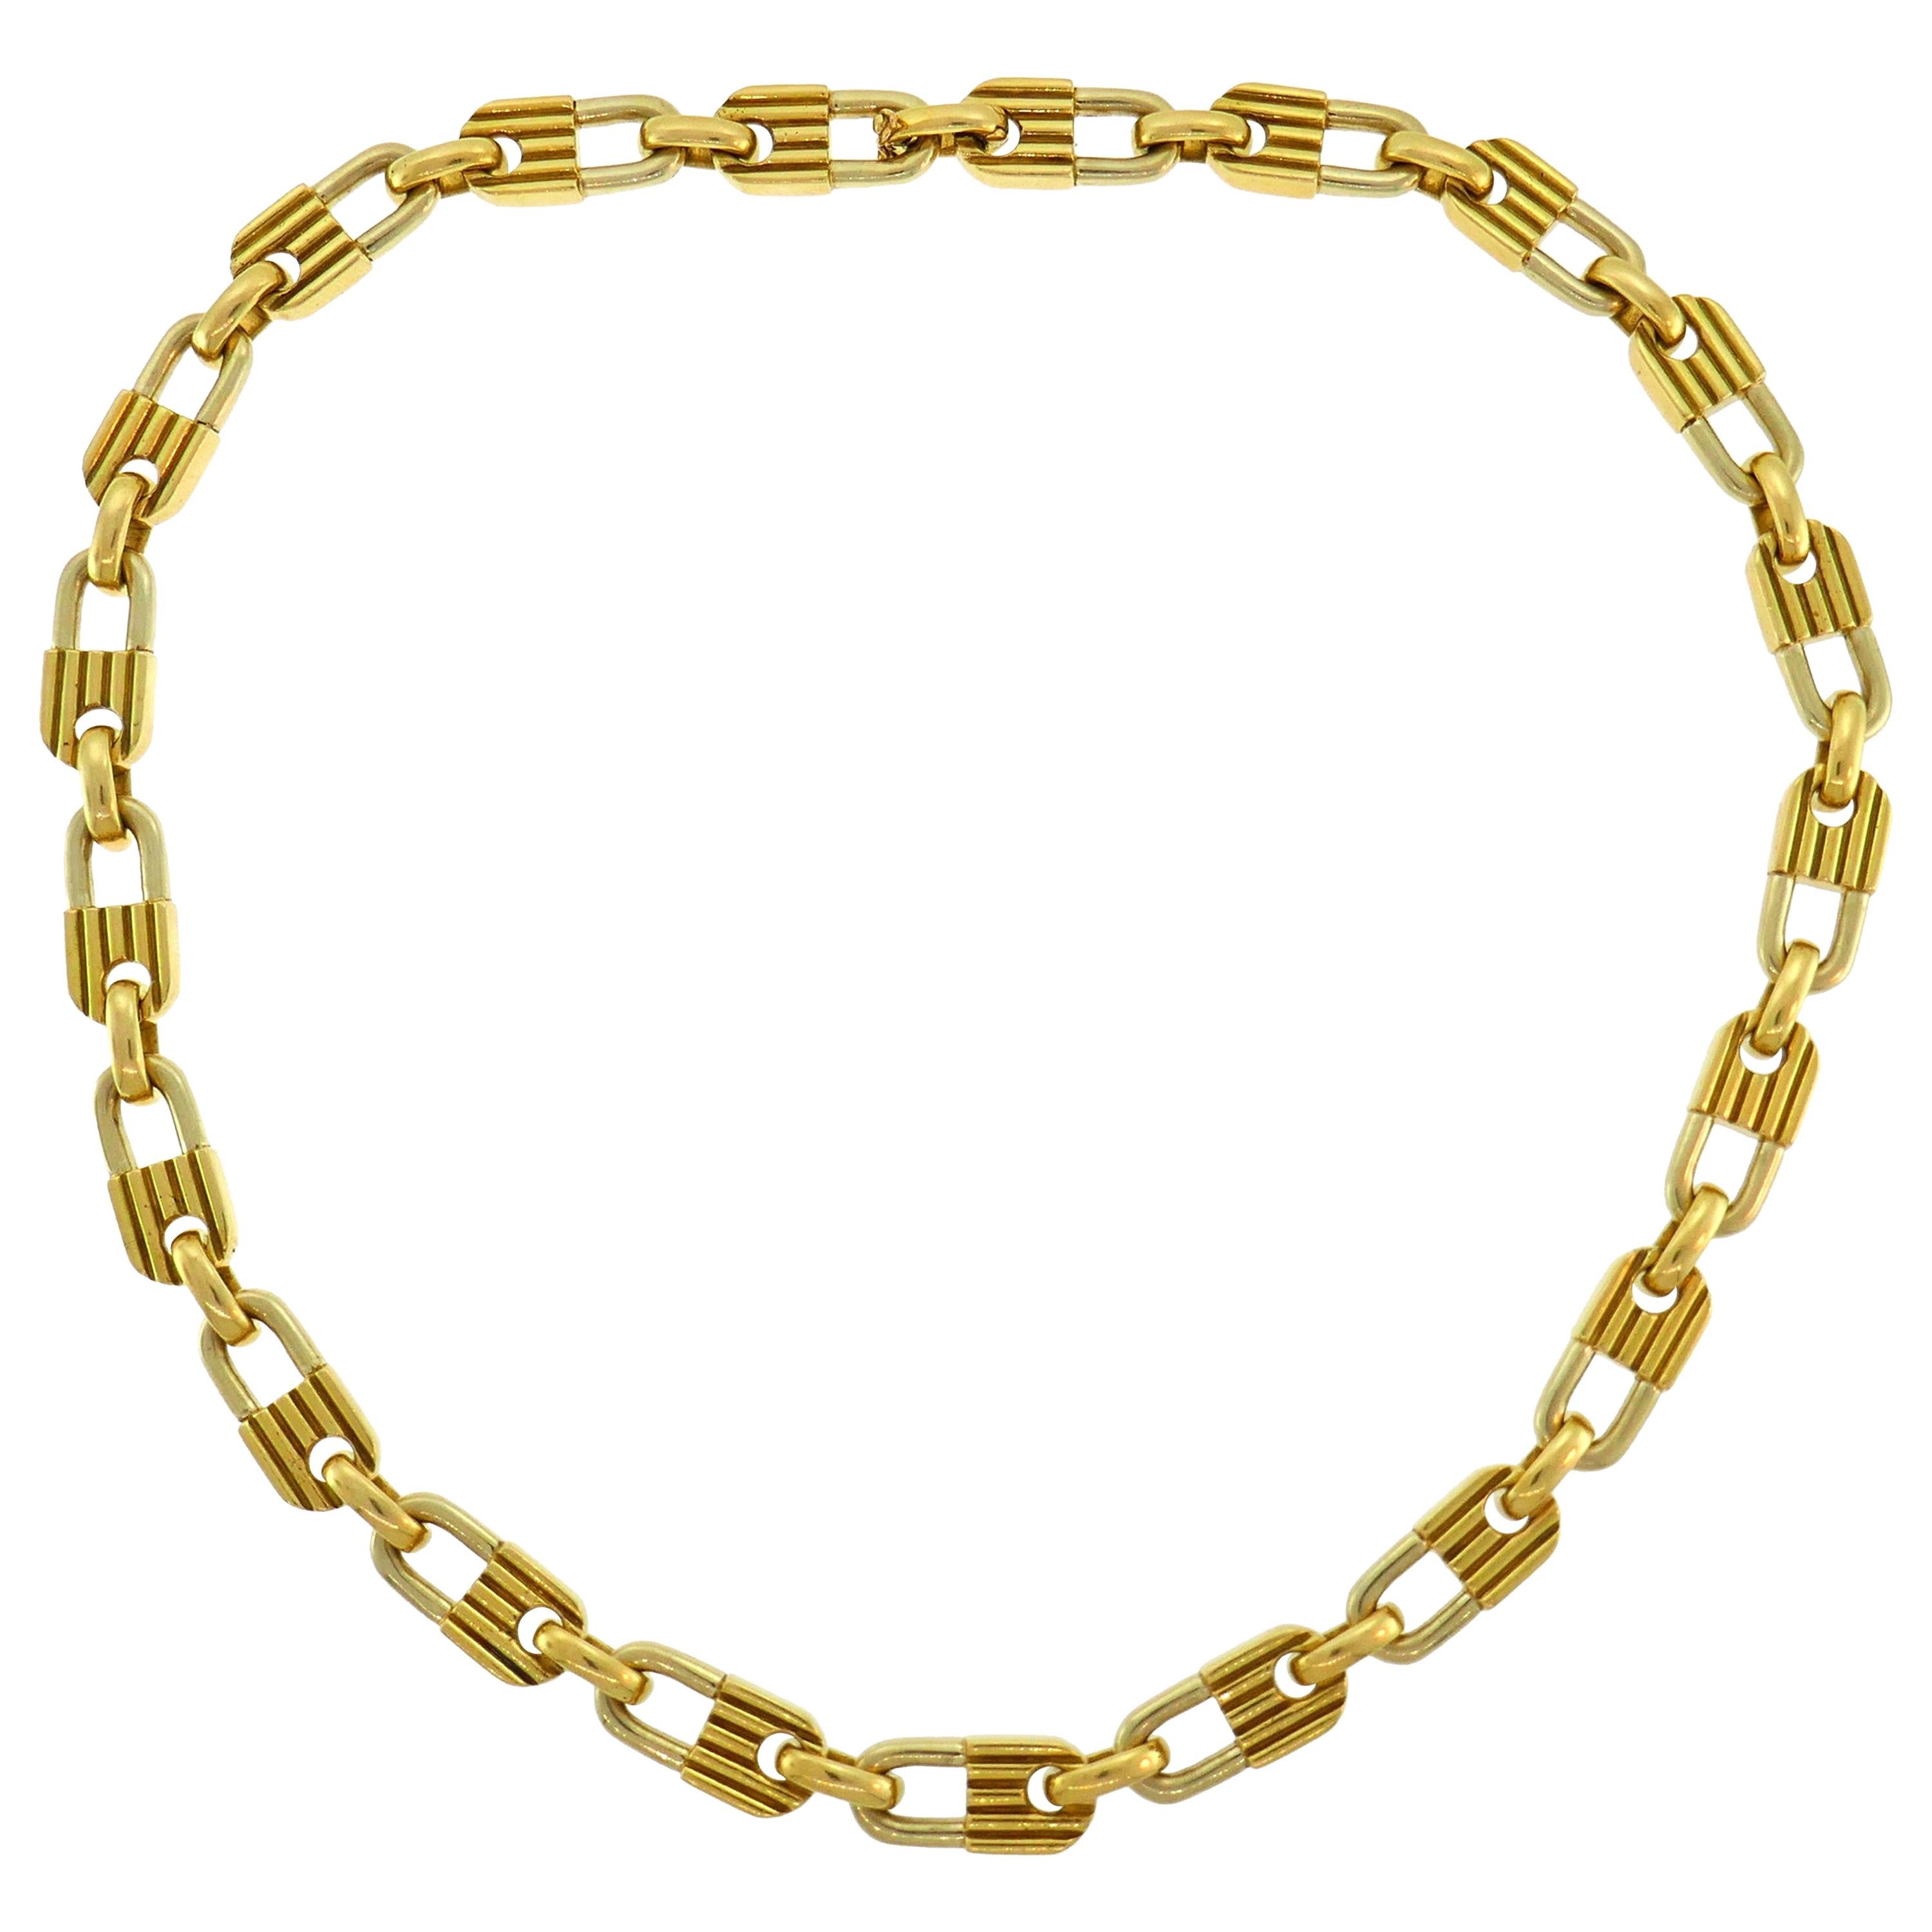 Mauboussin Yellow Gold Link Chain Necklace, 1970s French